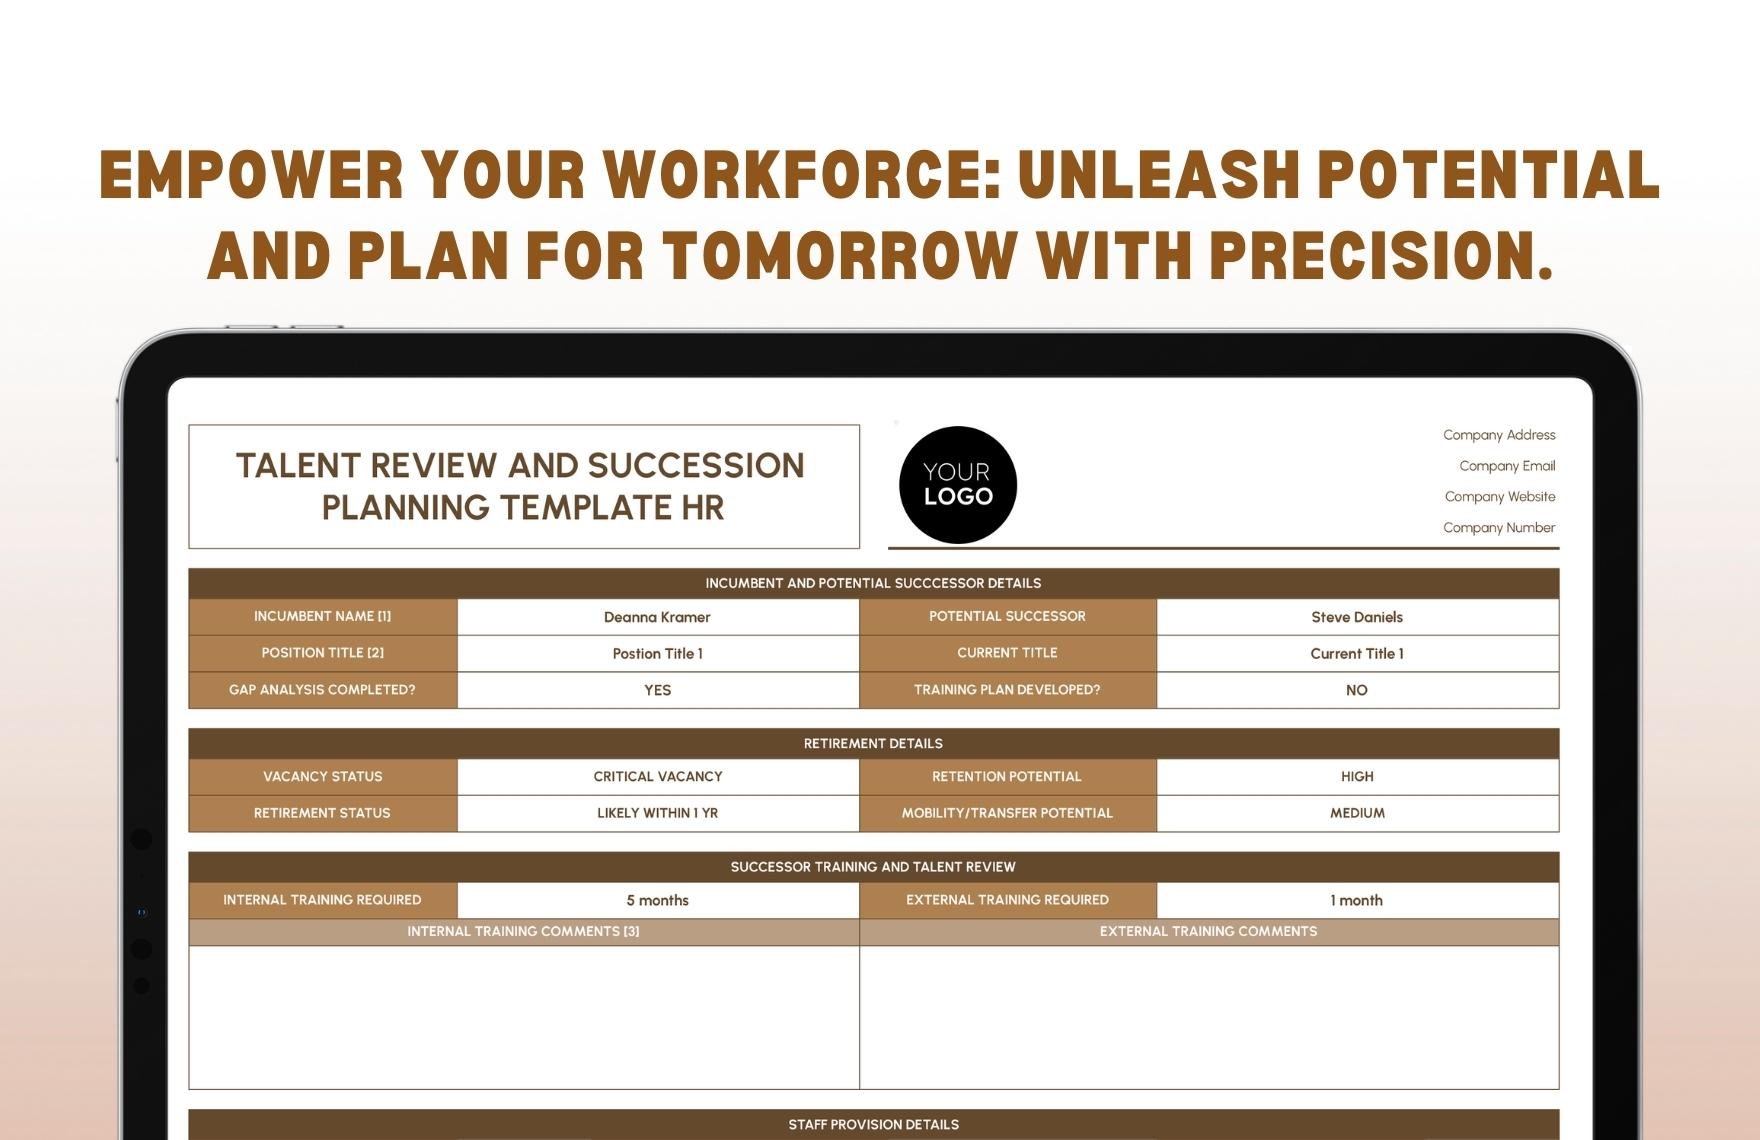 Talent Review and Succession Planning Template HR Template